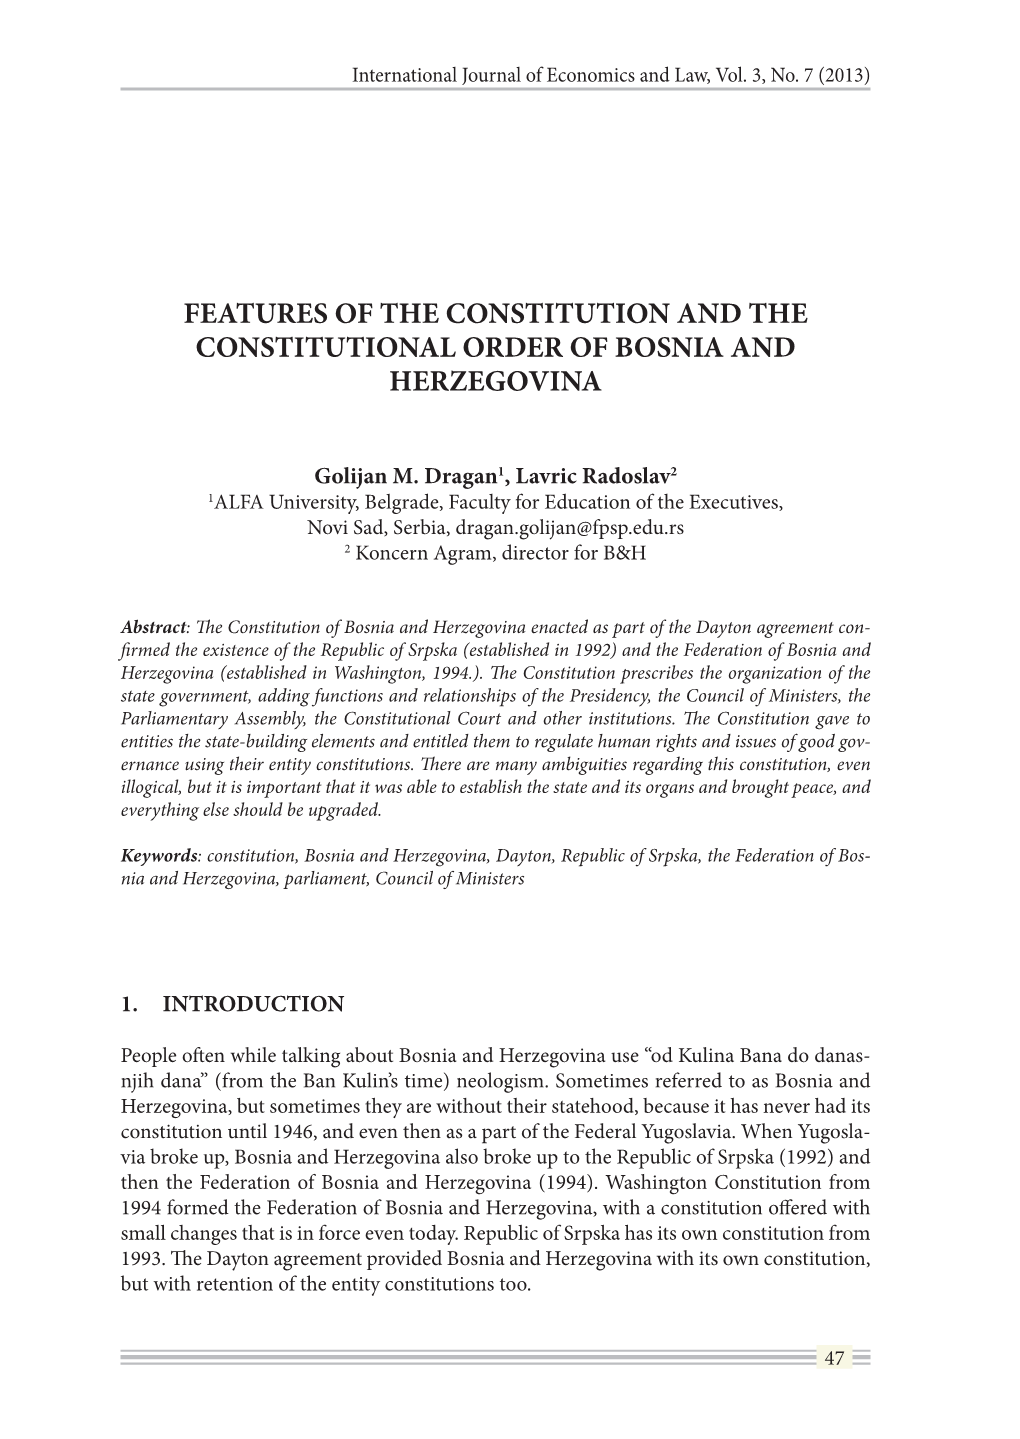 Features of the Constitution and the Constitutional Order of Bosnia and Herzegovina